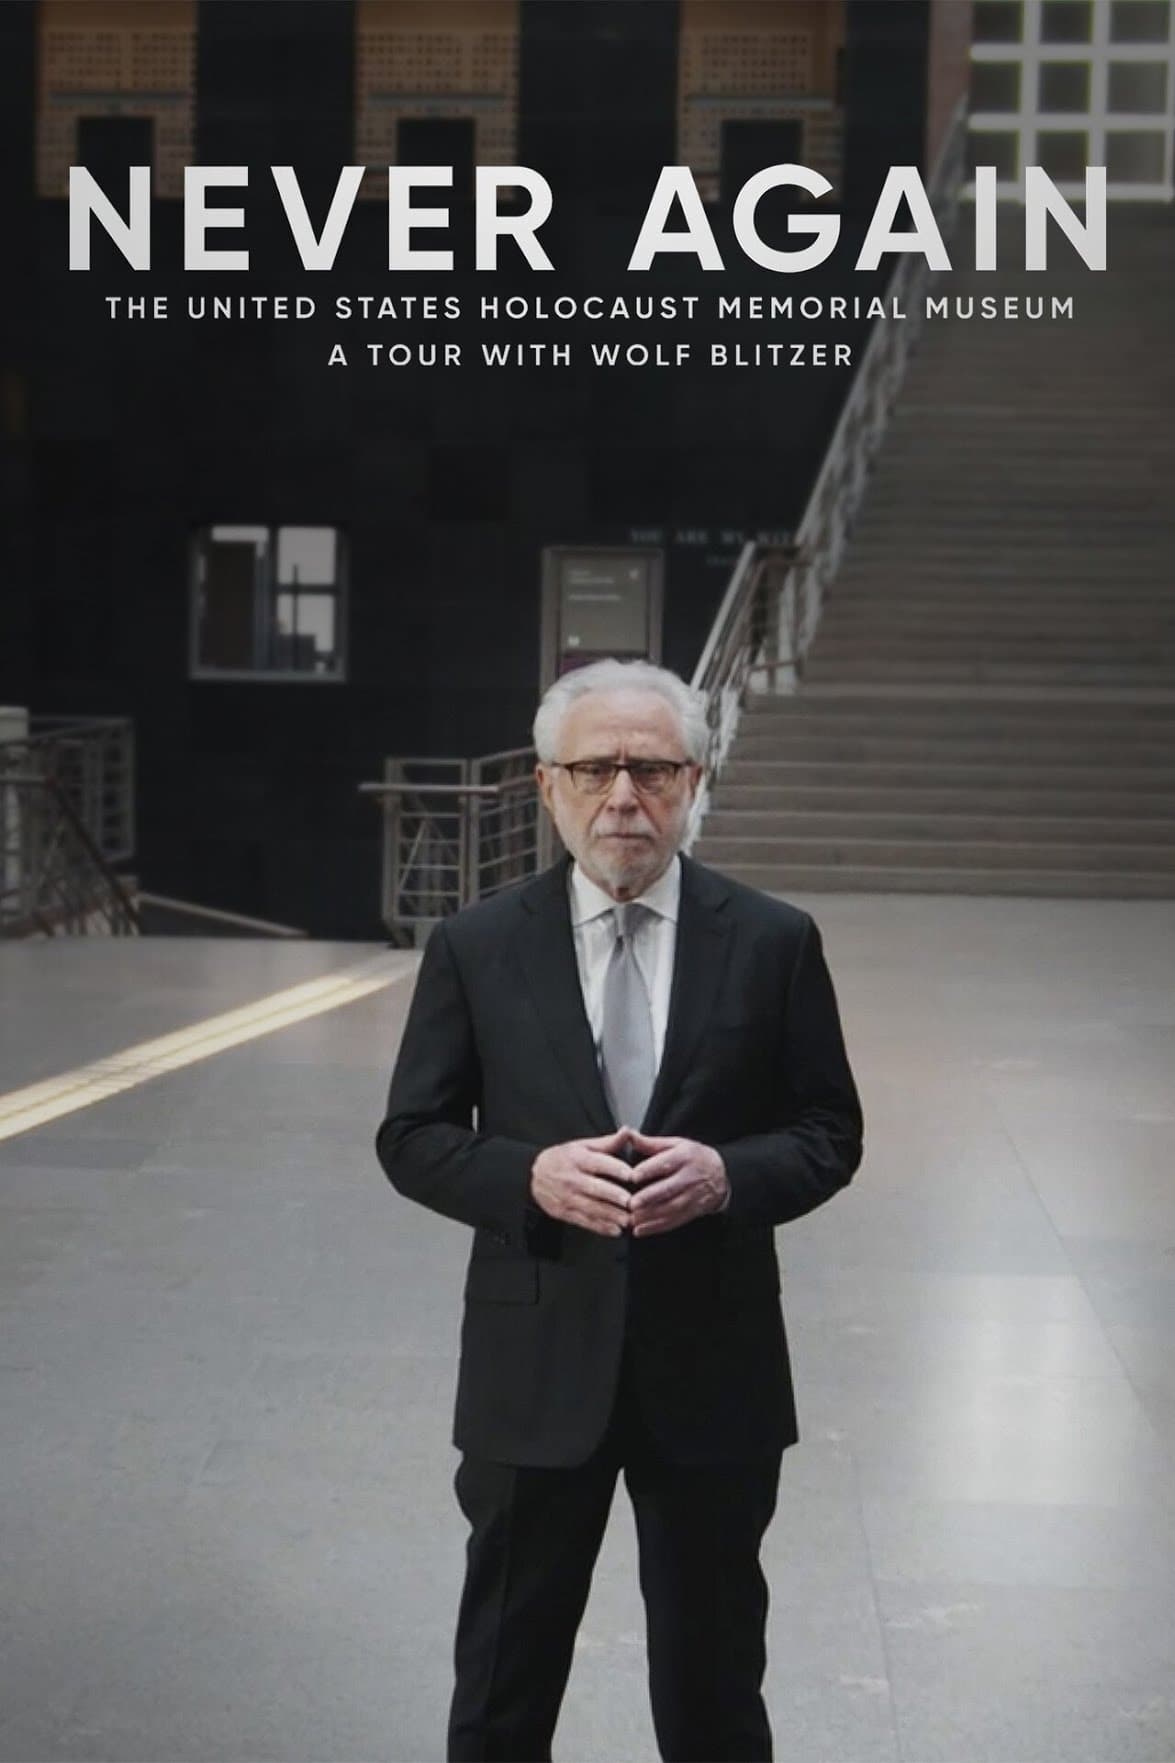 Never Again: The United States Holocaust Memorial Museum - A Tour with Wolf Blitzer